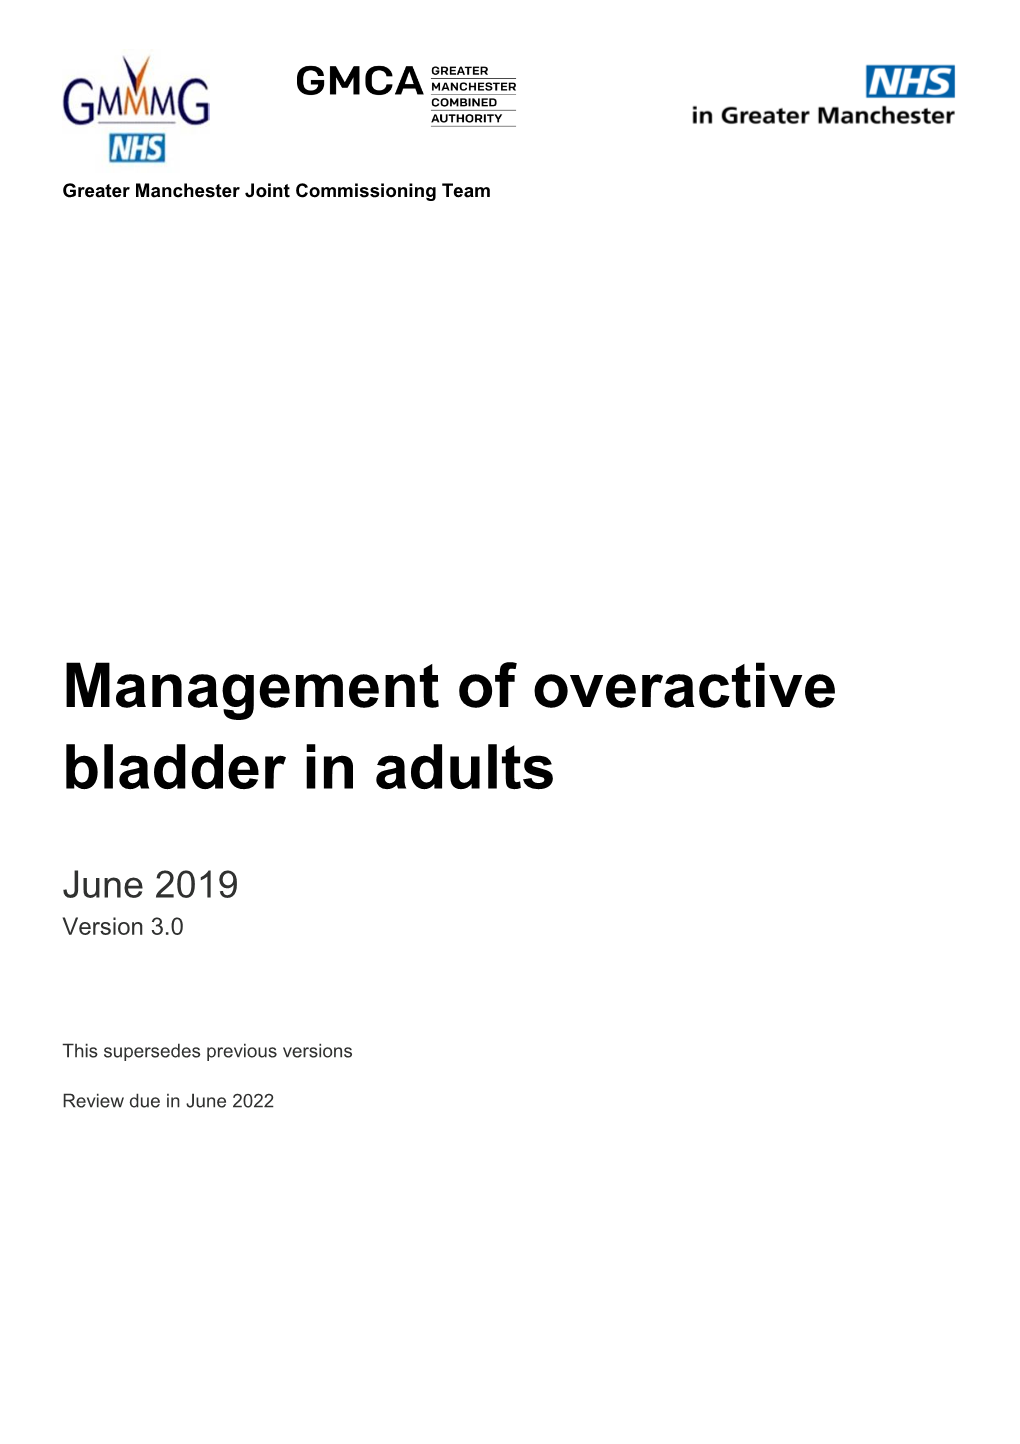 Management of Overactive Bladder in Adults